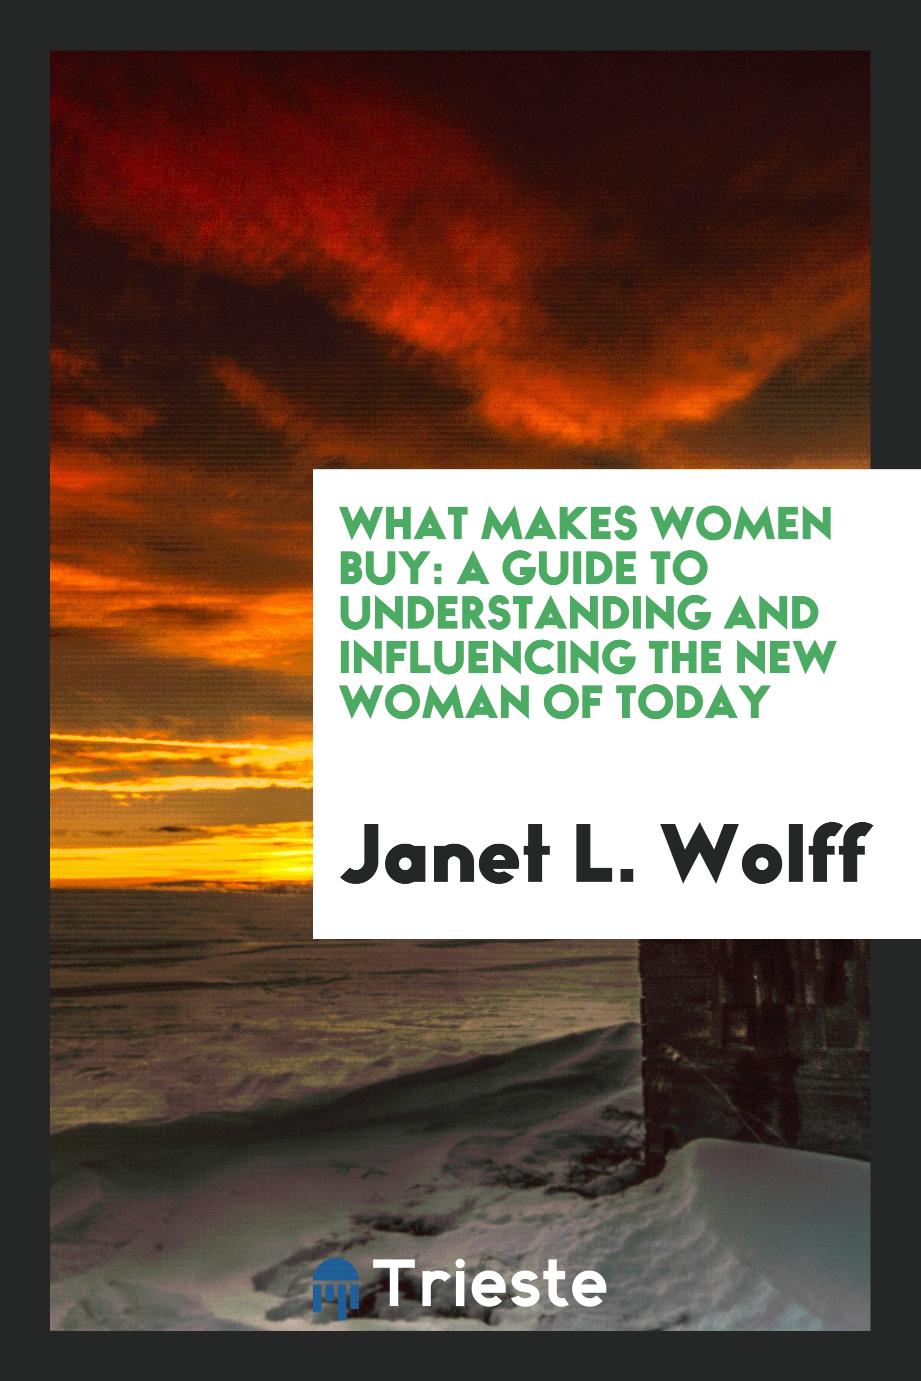 What Makes Women Buy: A Guide to Understanding and Influencing the New Woman of Today